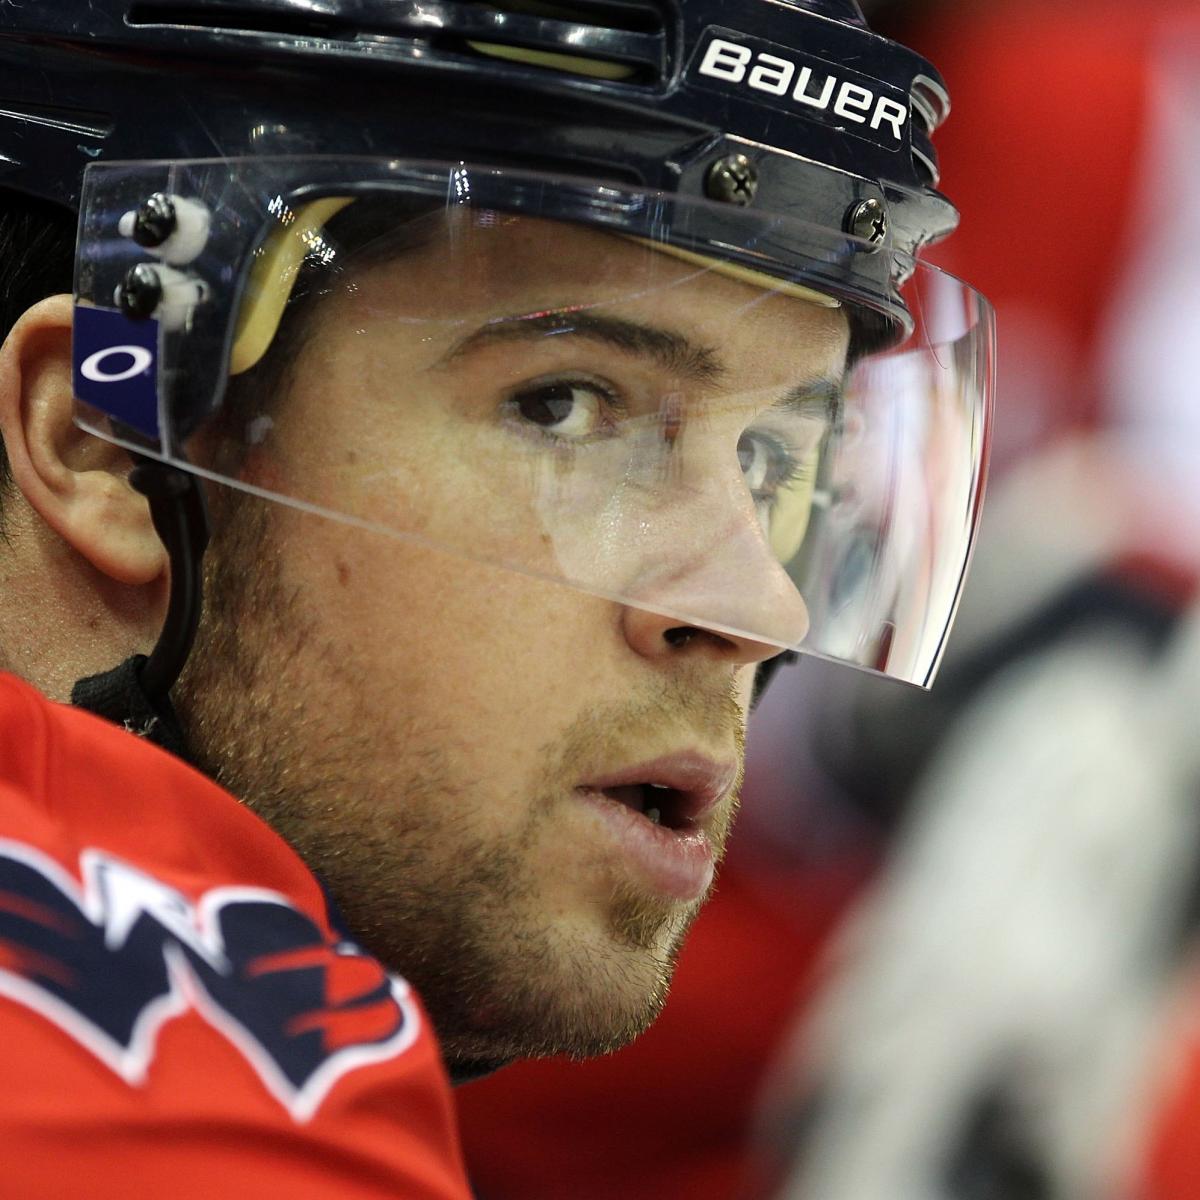 Mike Green won't return to the Capitals